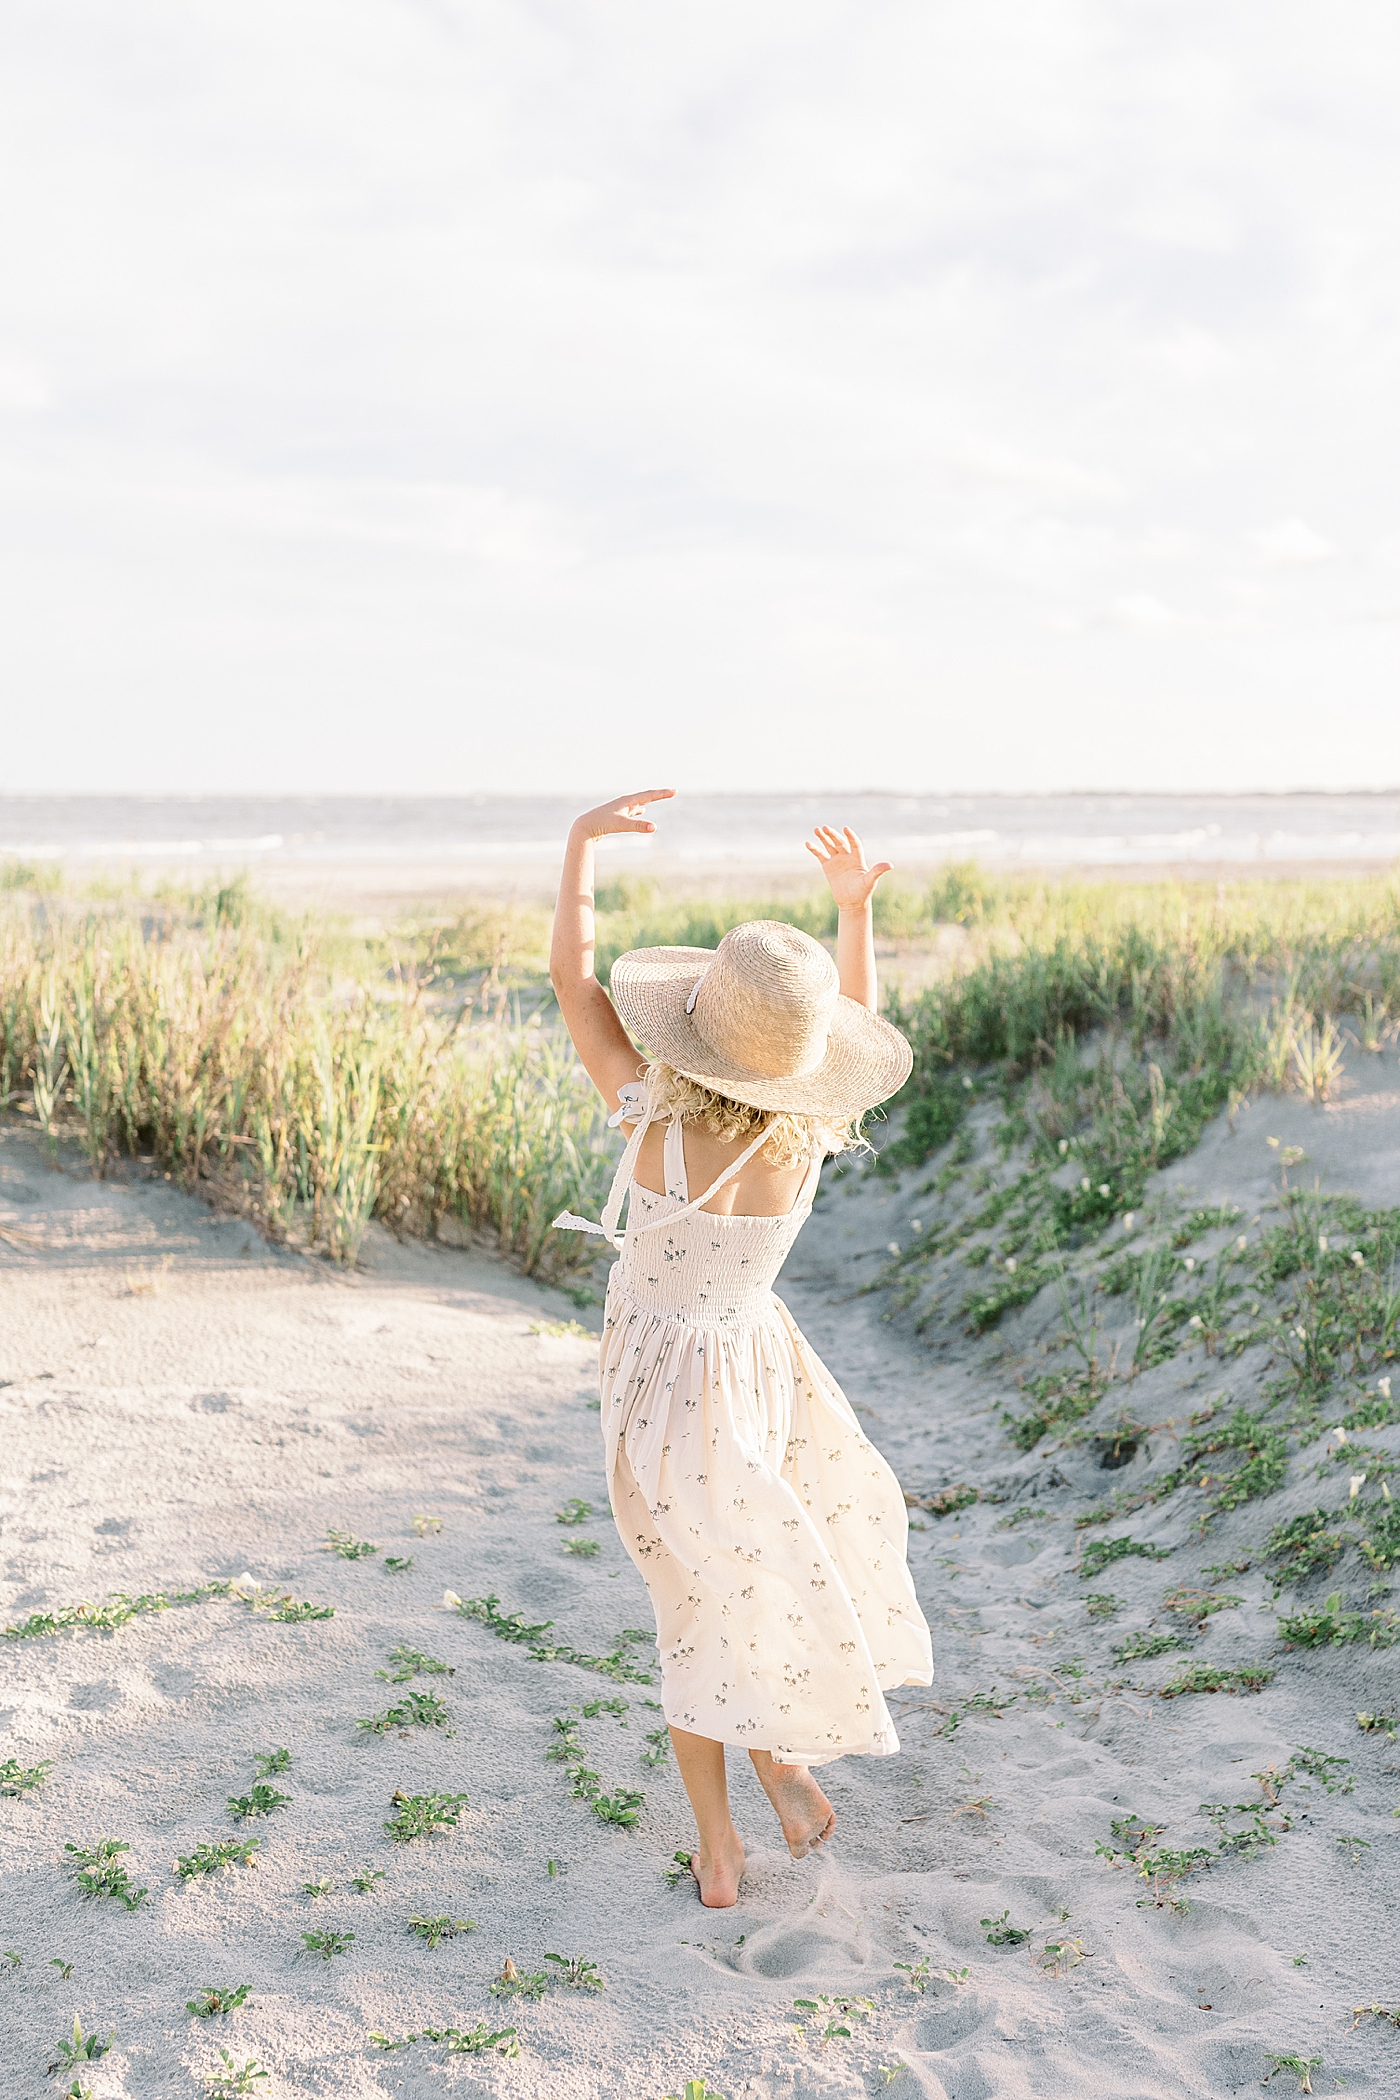 Little girl in a floral dress and hat twirling on the beach | Image by Caitlyn Motycka